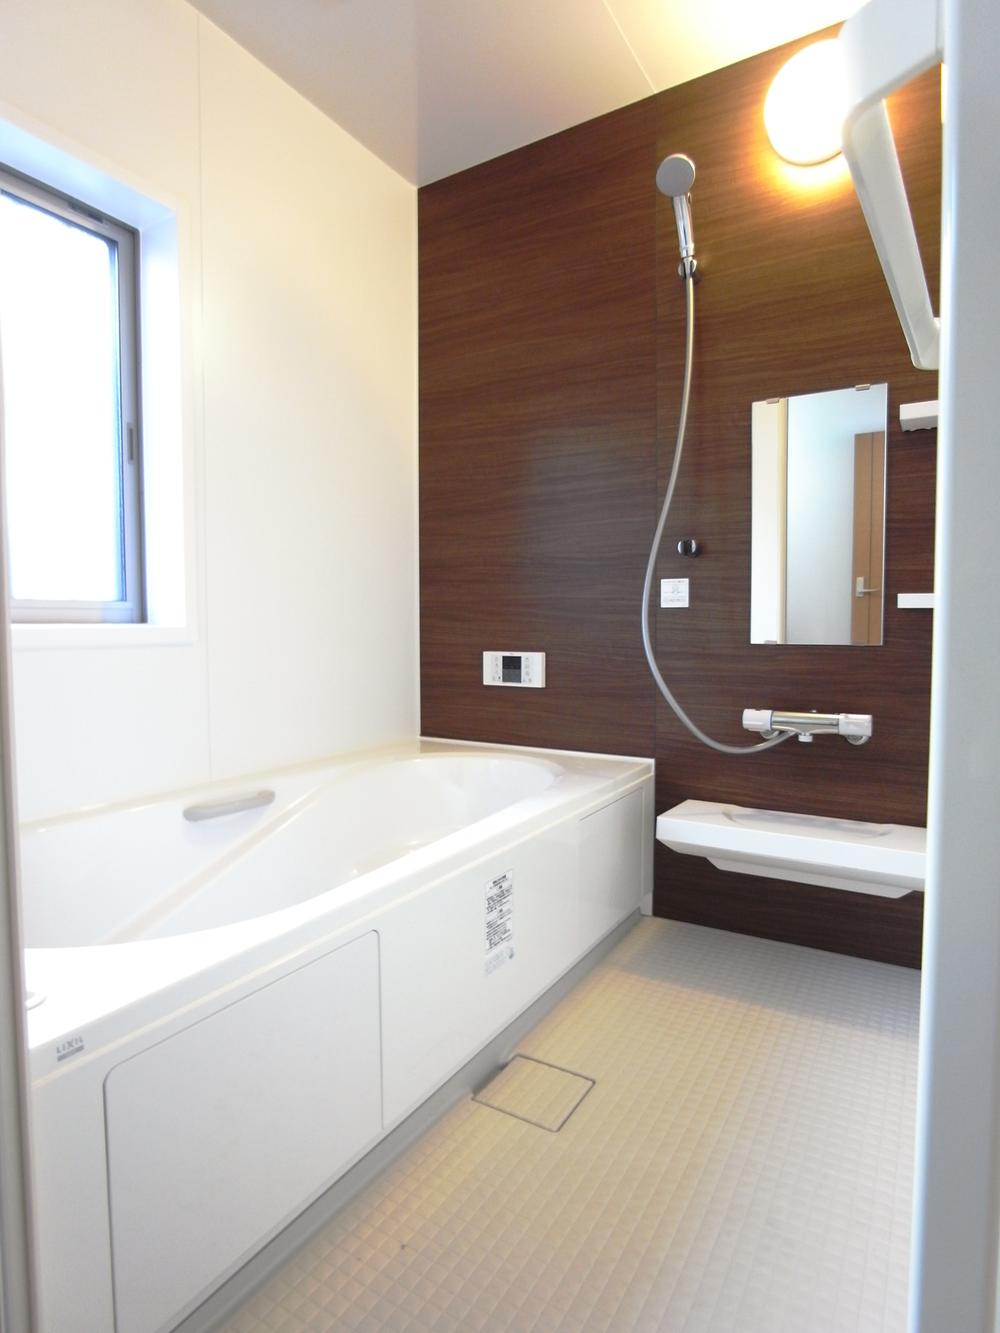 Bathroom. Indoor (September 2013) is a stylish bathroom of 1 pyeong type of size to put together the shooting children.